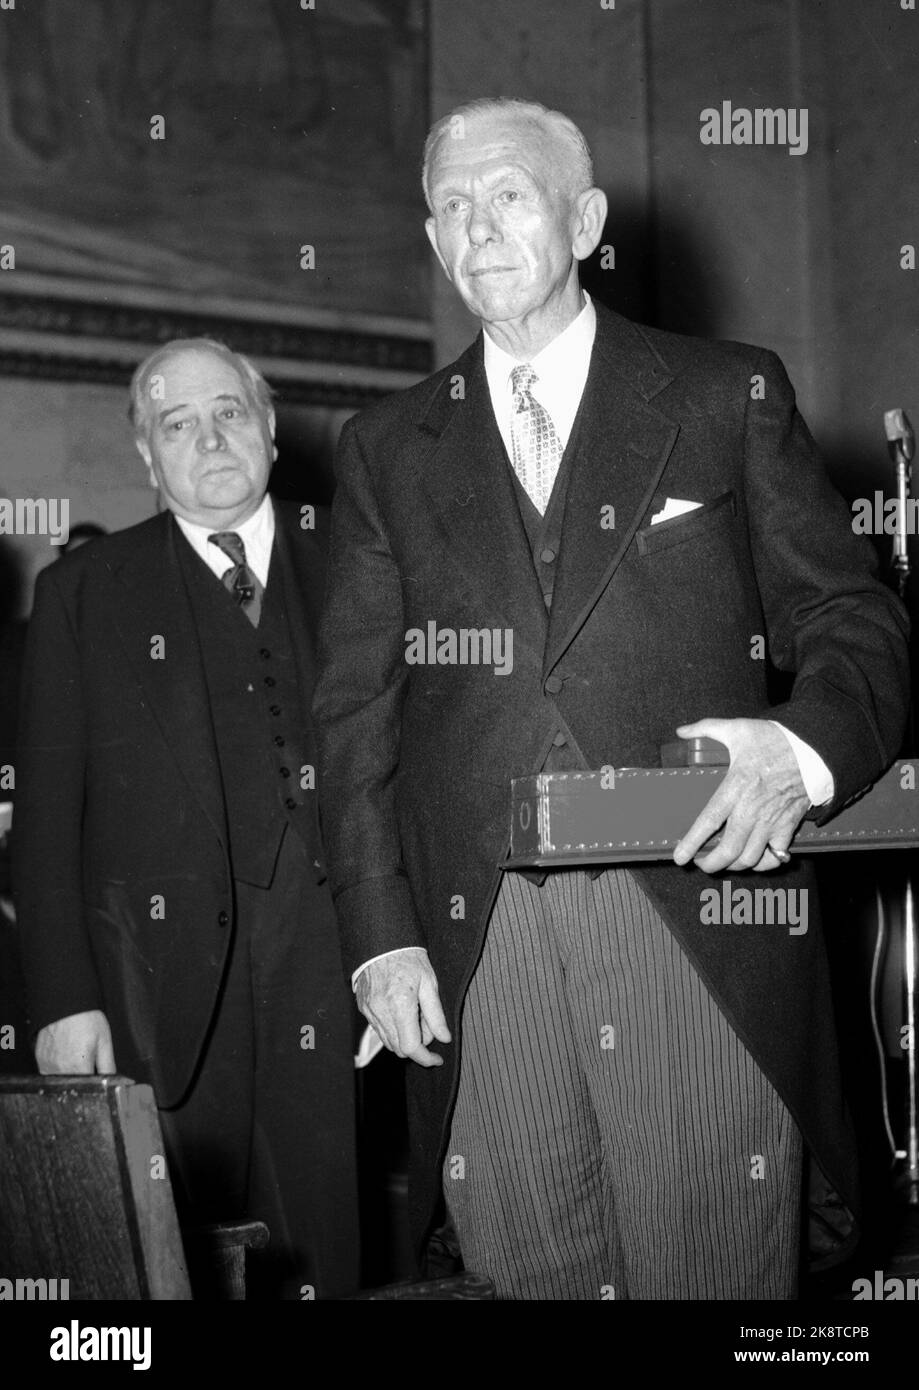 Oslo 19531210 The Peace Prize: Nobel Peace Prize 1953 to George Marshall, American General, former Foreign Minister and Defense Minister, UN Delegate, and initiator of the Marshall Plan aid program. Here Marshall (th) with the price after the distribution in the University Aula. Photo Valldal / NTB / NTB Stock Photo